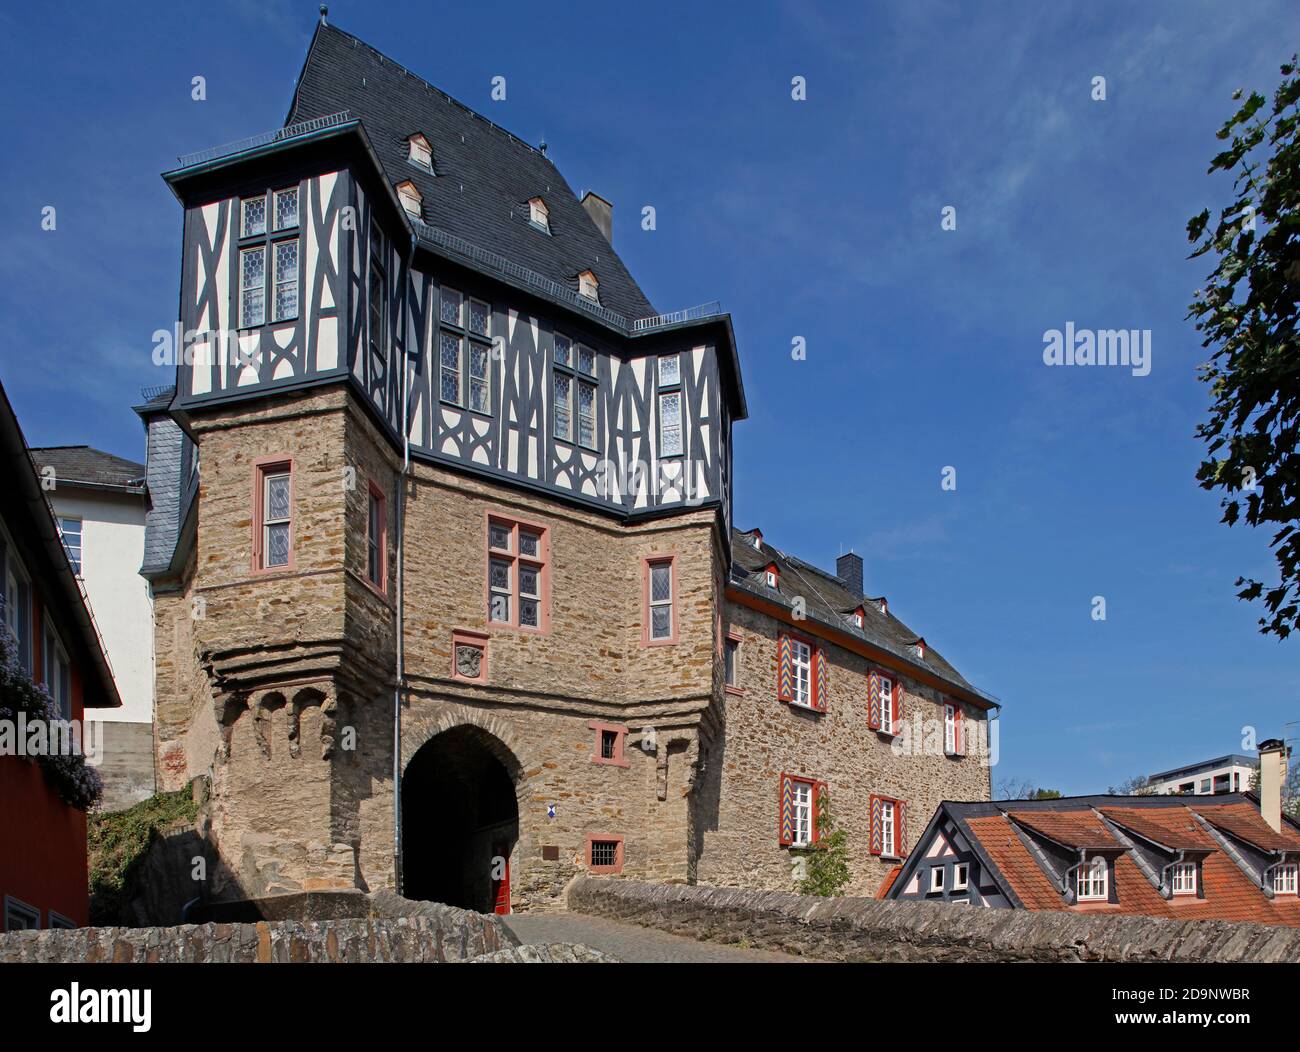 Gatehouse of the castle district, built in 1497, Idstein, Hesse, Germany Stock Photo